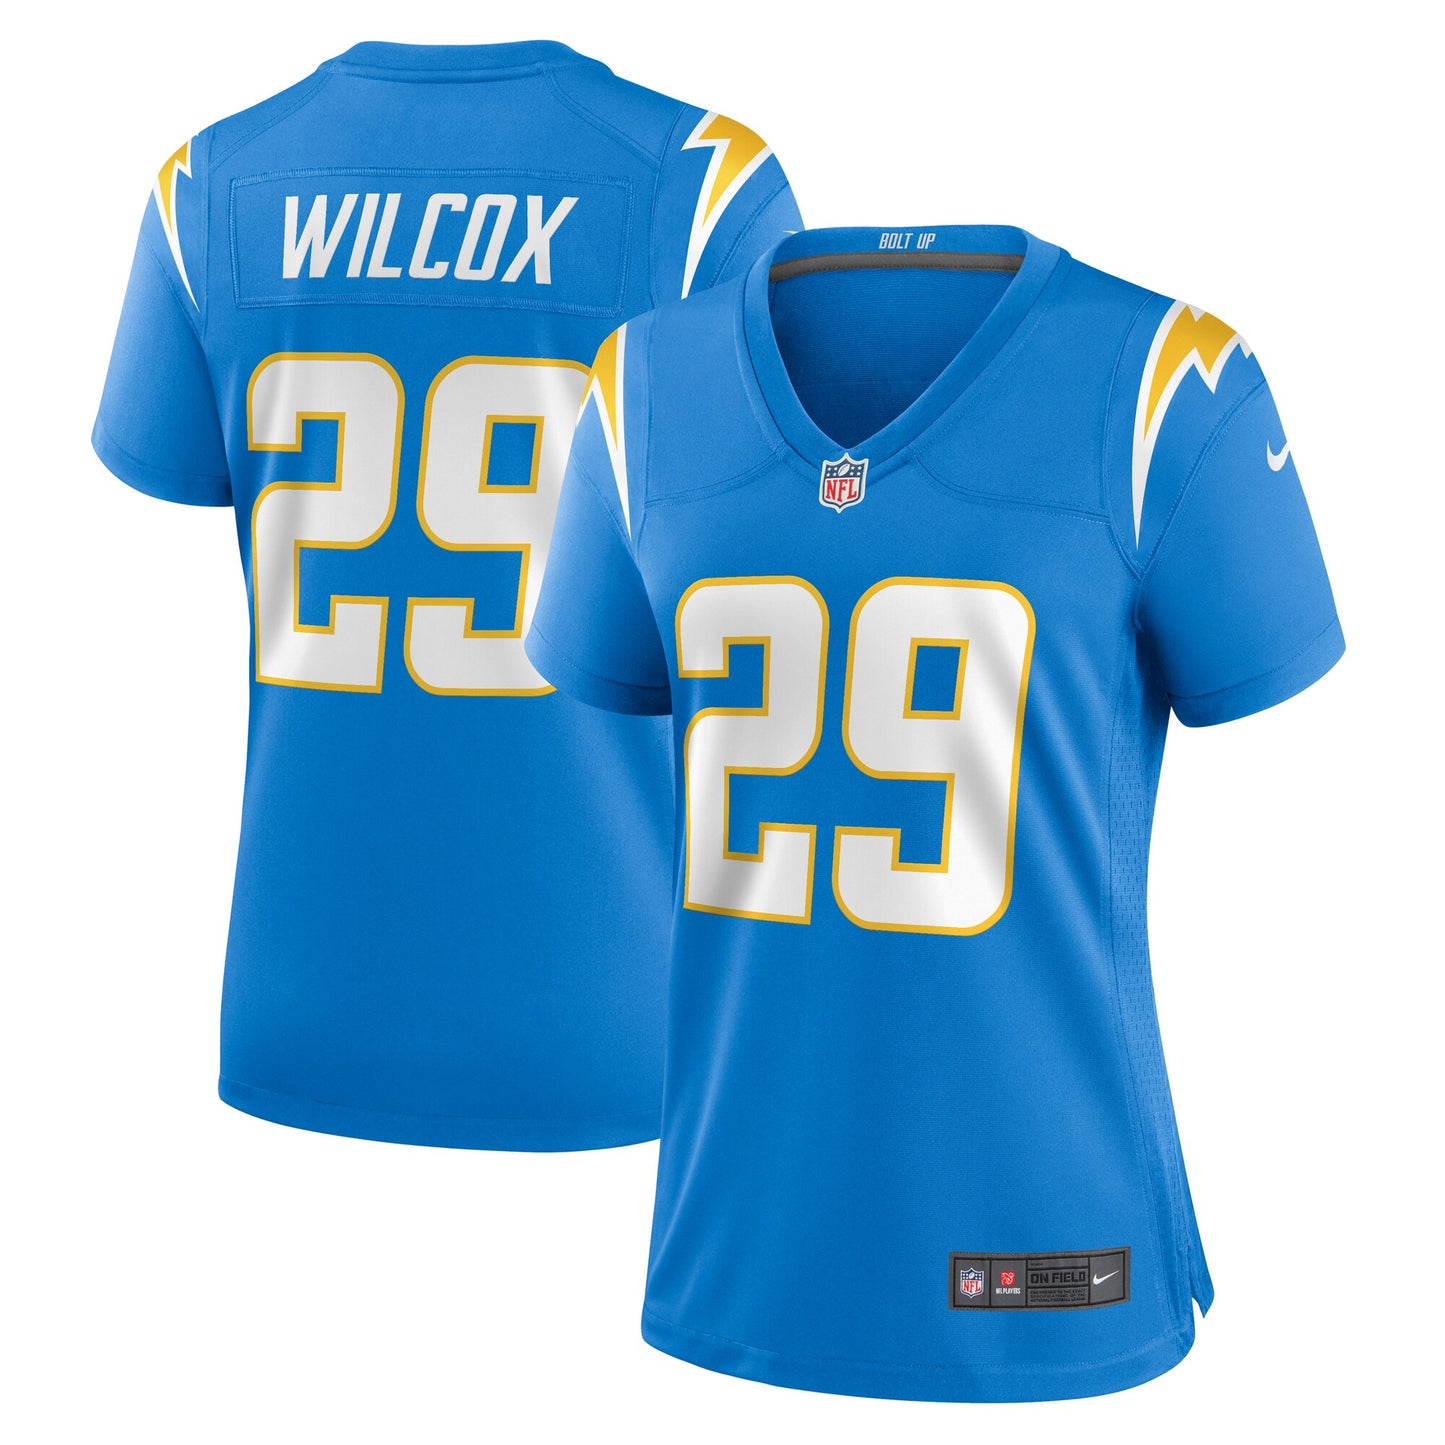 Chris Wilcox Los Angeles Chargers Nike Women's Team Game Jersey -  Powder Blue